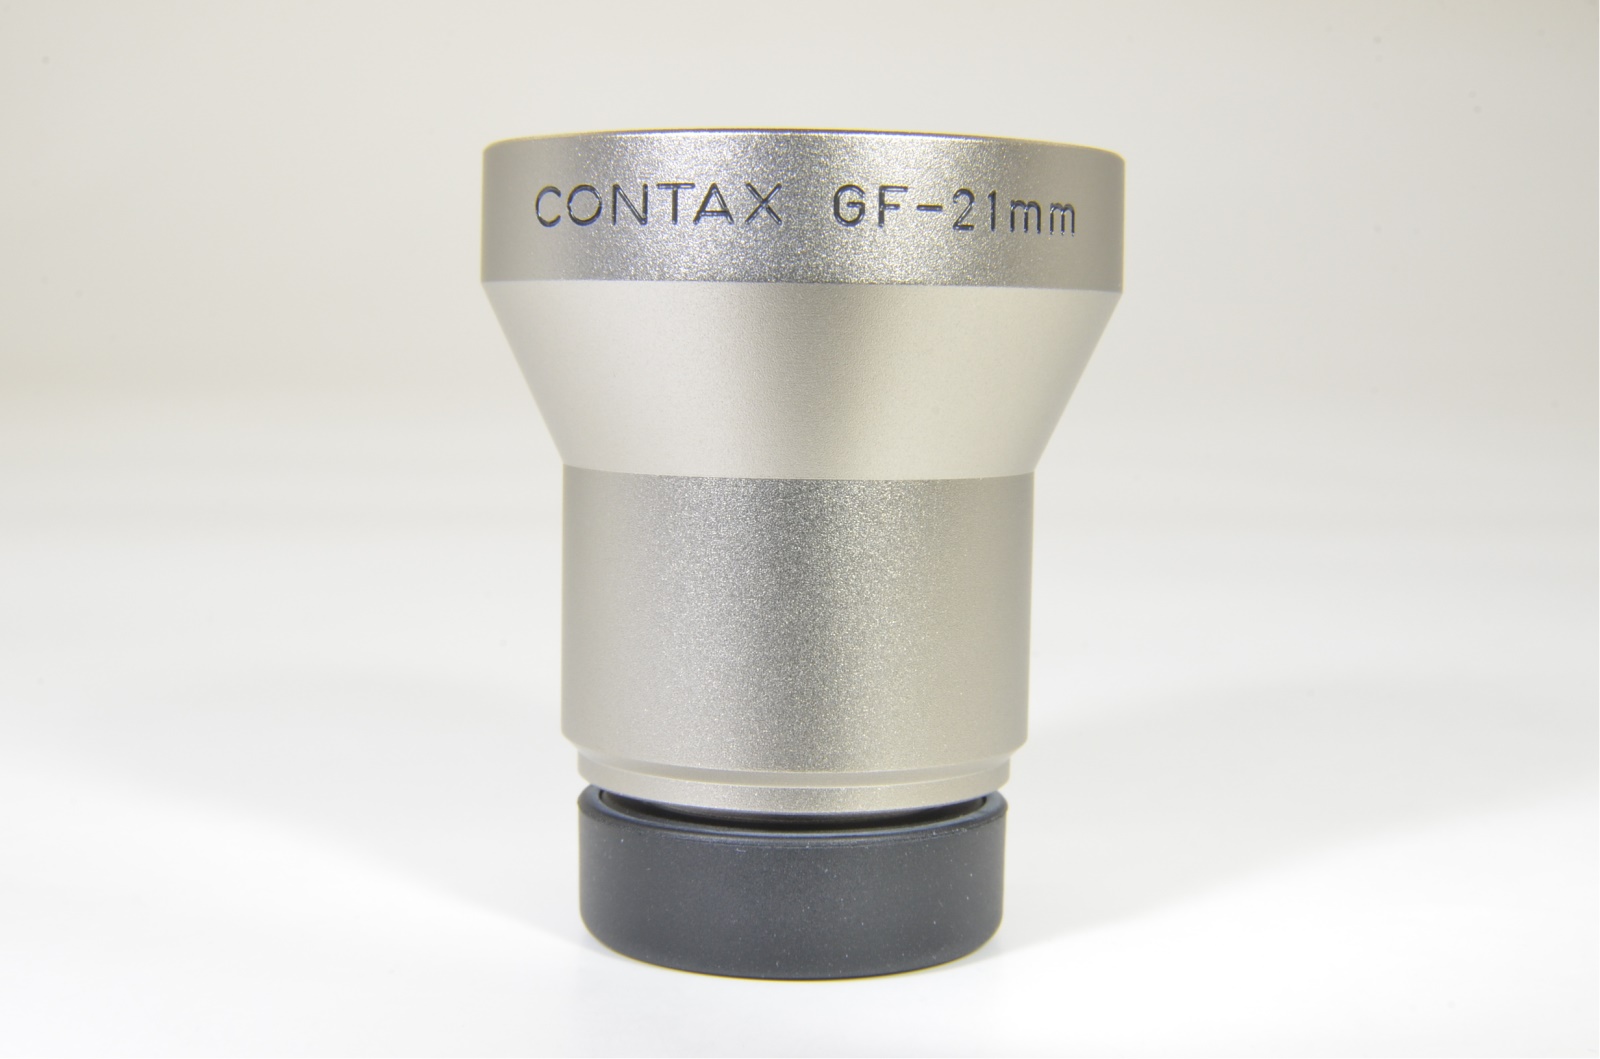 contax carl zeiss t* biogon 21mm f2.8 lens with view finder for g2